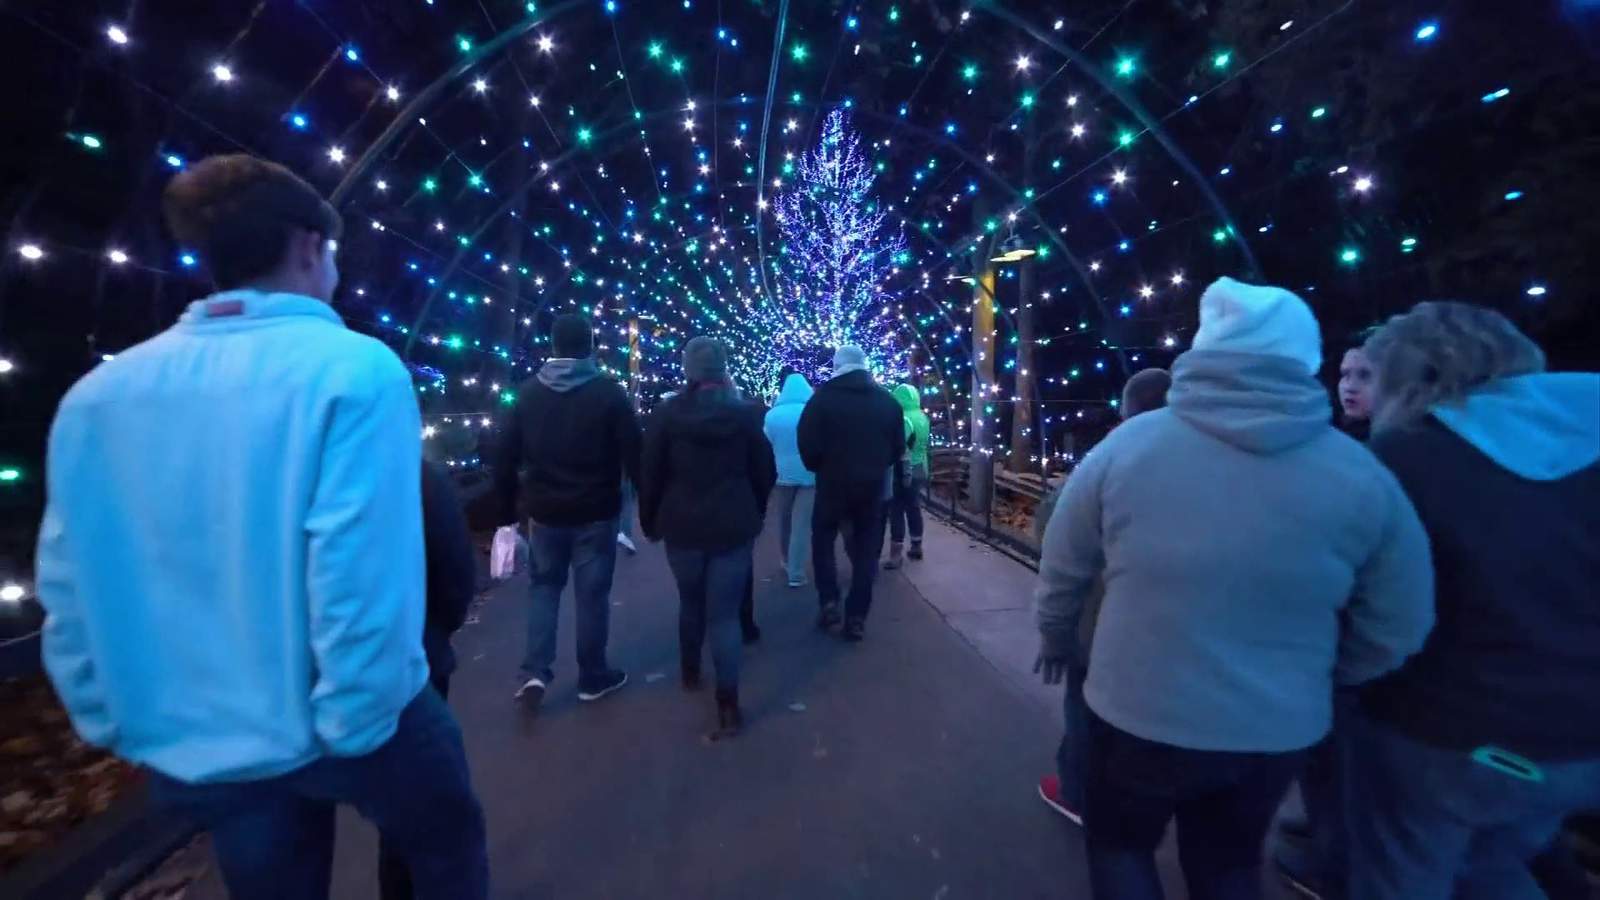 Dollywood features 5 million holiday lights during Christmas festival